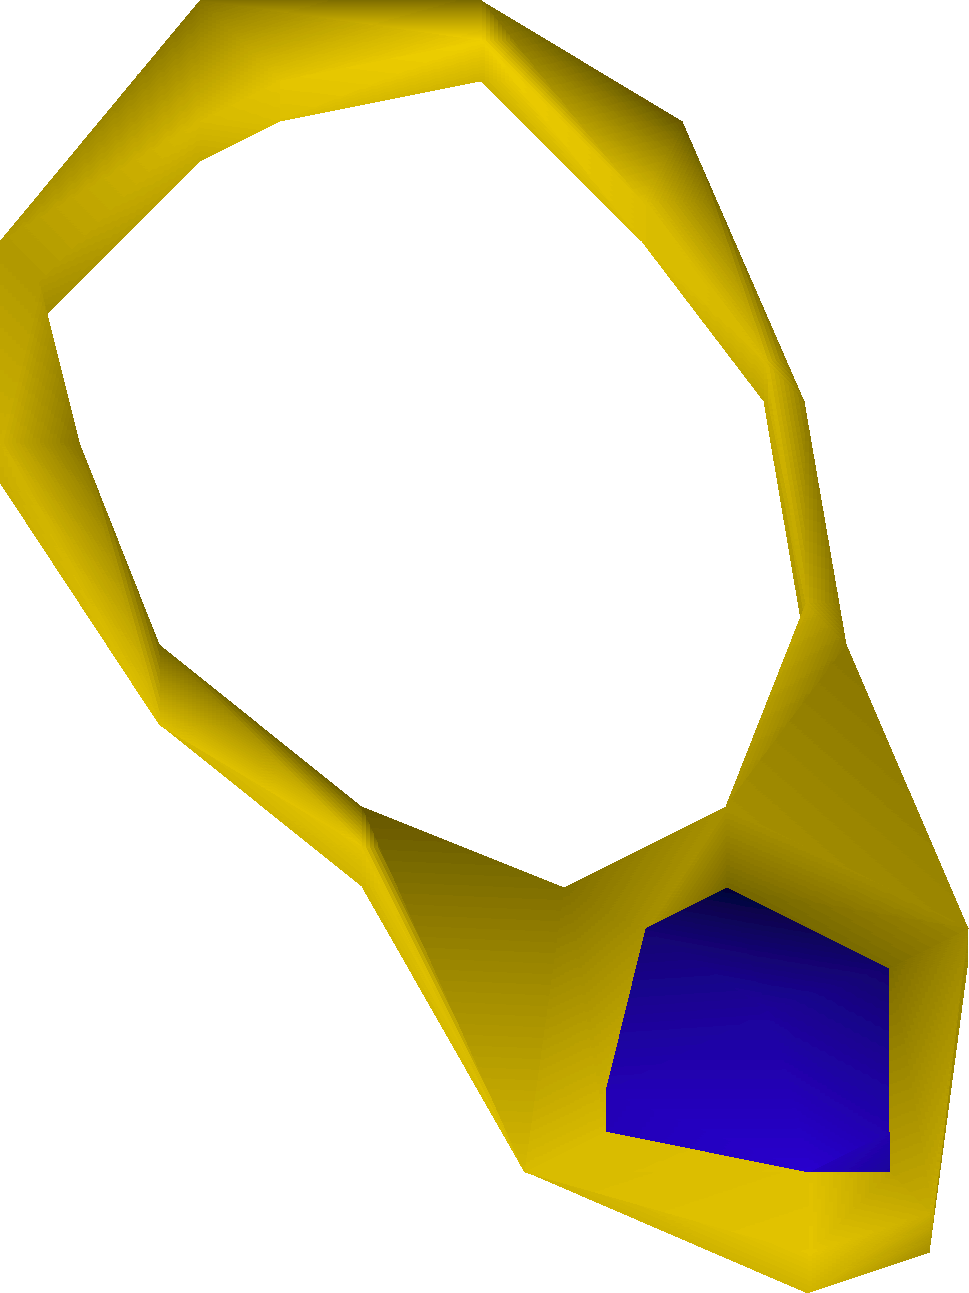 Sapphire Necklace Old School - Ruby Necklace Osrs (969x1293)